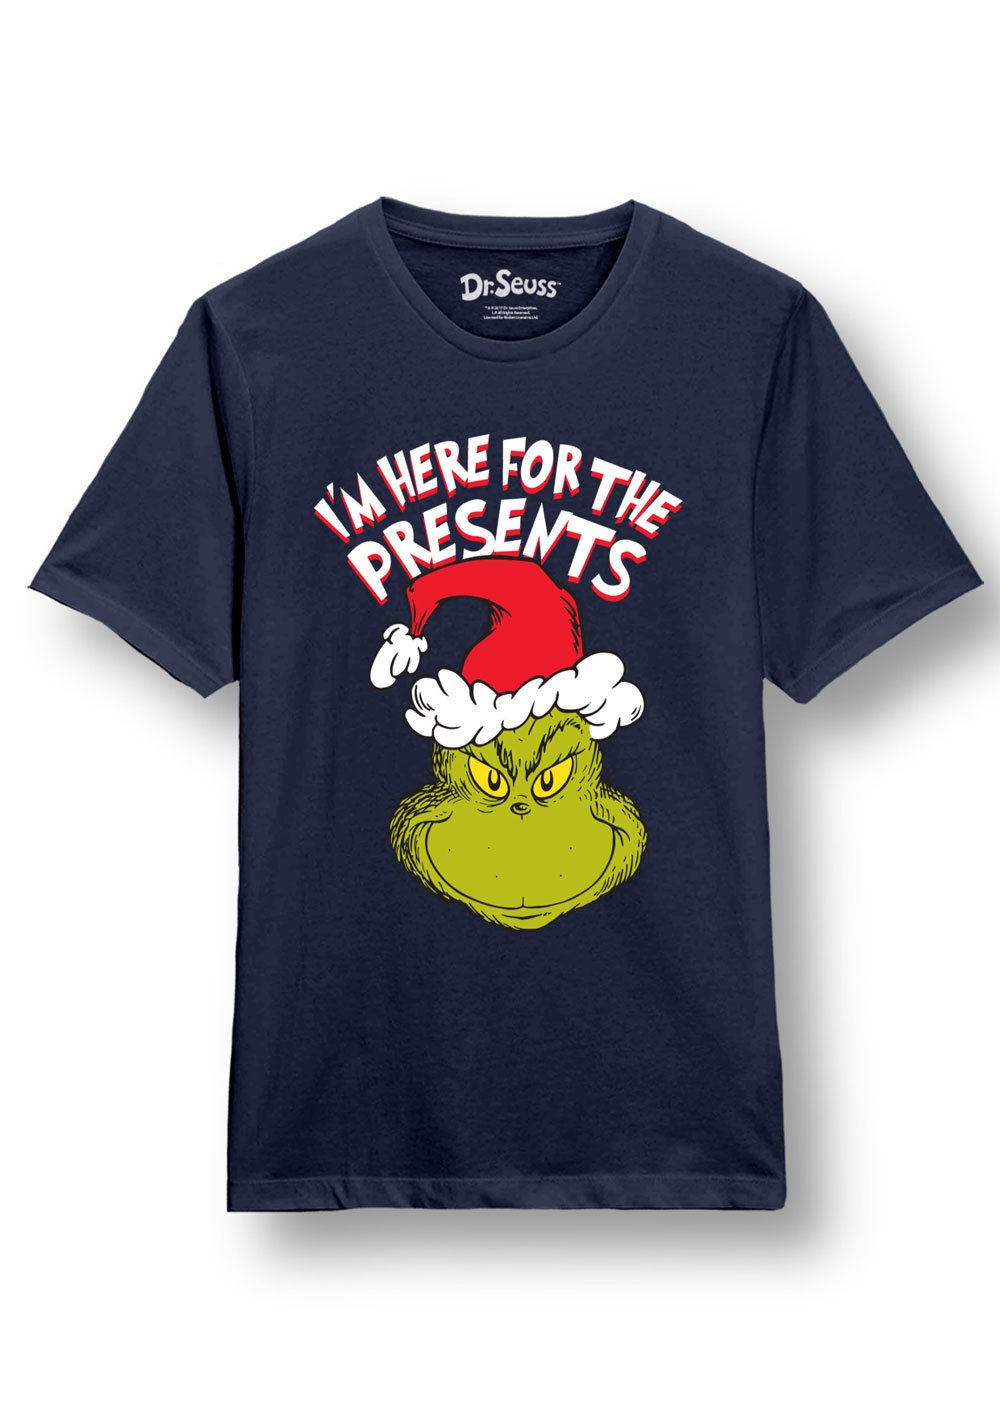 Grinch T-Shirt femme Here for the Presents (XL)